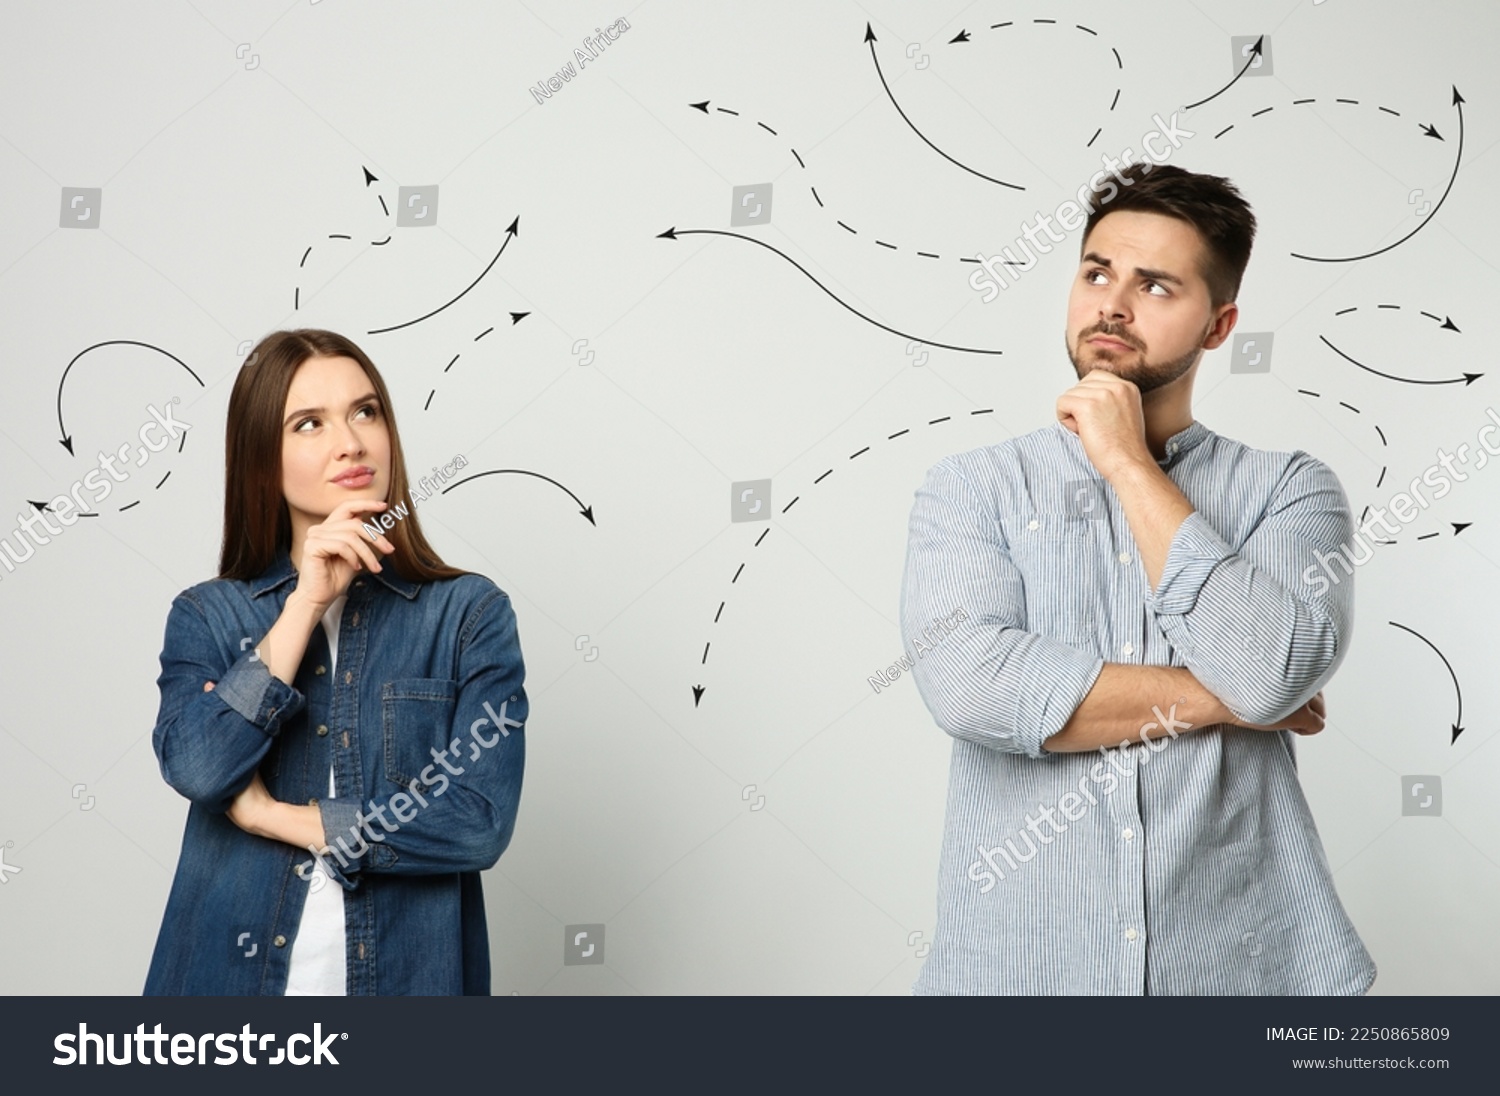 Choice in profession or other areas of life, concept. Making decision, thoughtful young man and woman surrounded by drawn arrows on light background #2250865809